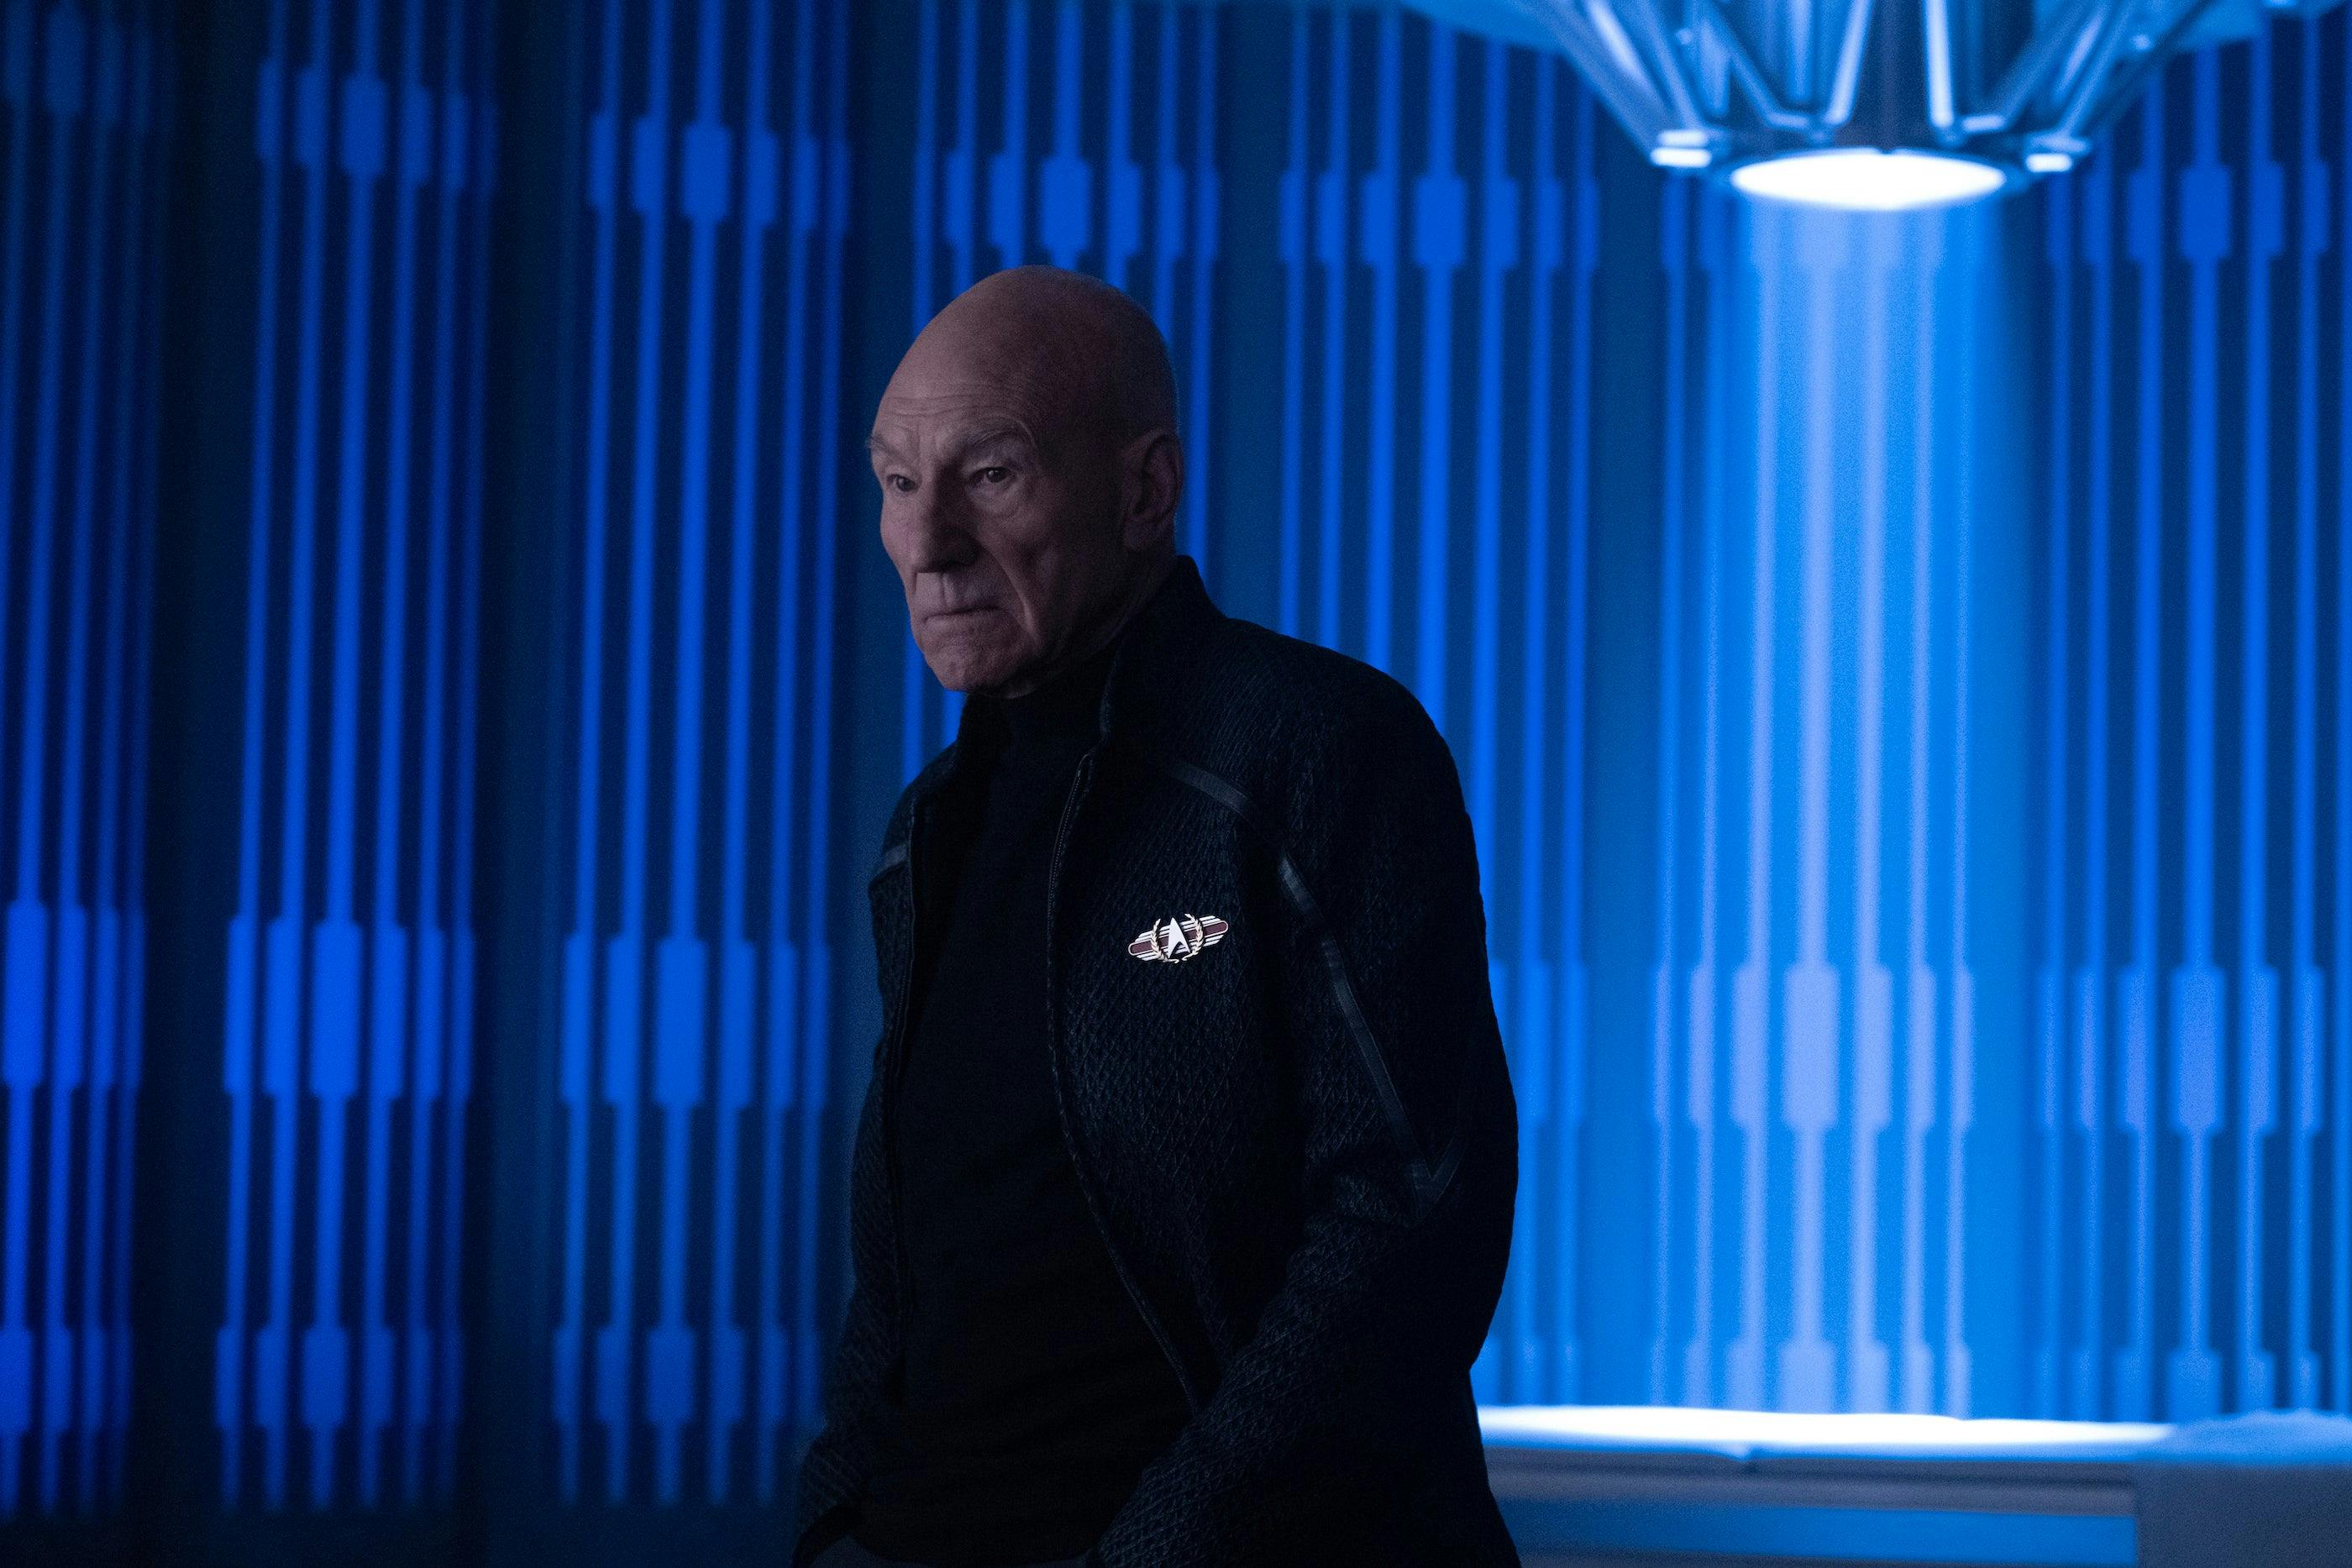 In Sickbay, Picard stands alone with a grim expression with a light over an empty med bed behind him (Star Trek: Picard, "Vox")